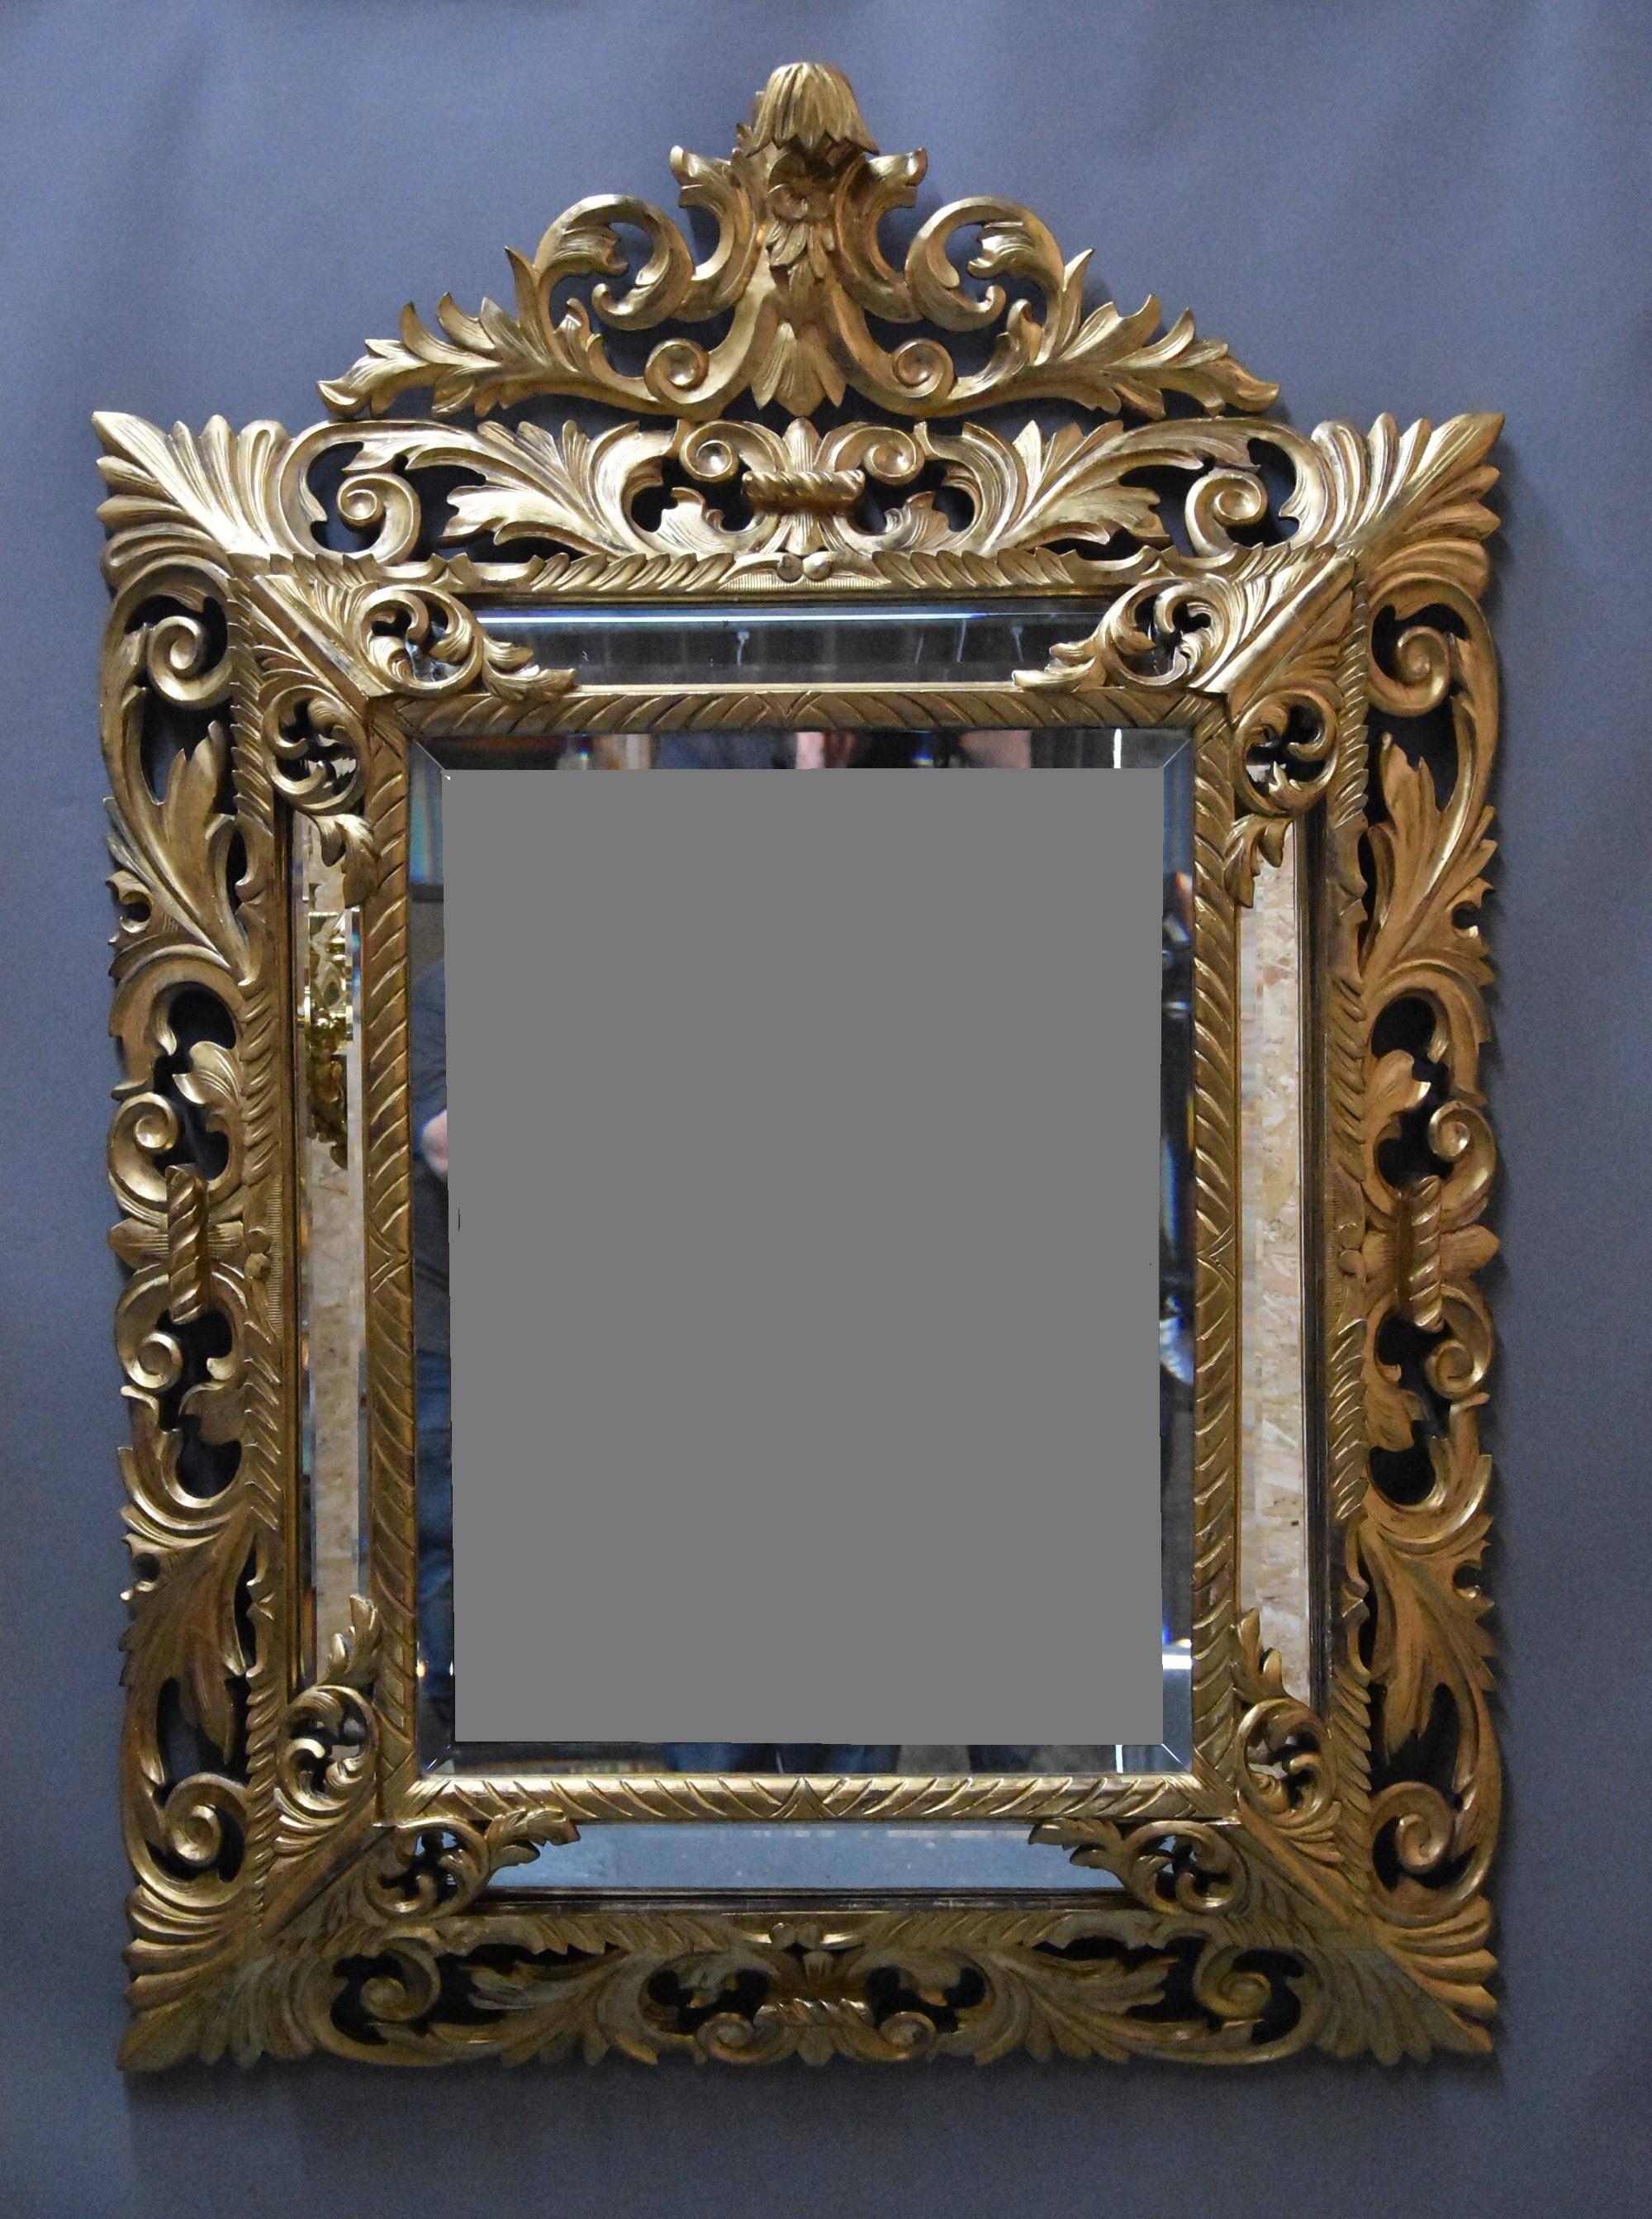 A large late 19th century Italian, probably Florentine, superbly carved giltwood cushion mirror.

This mirror consists of a cresting to the top, superbly carved with floral and scrolling foliate decoration.

This leads down to a deep, superbly